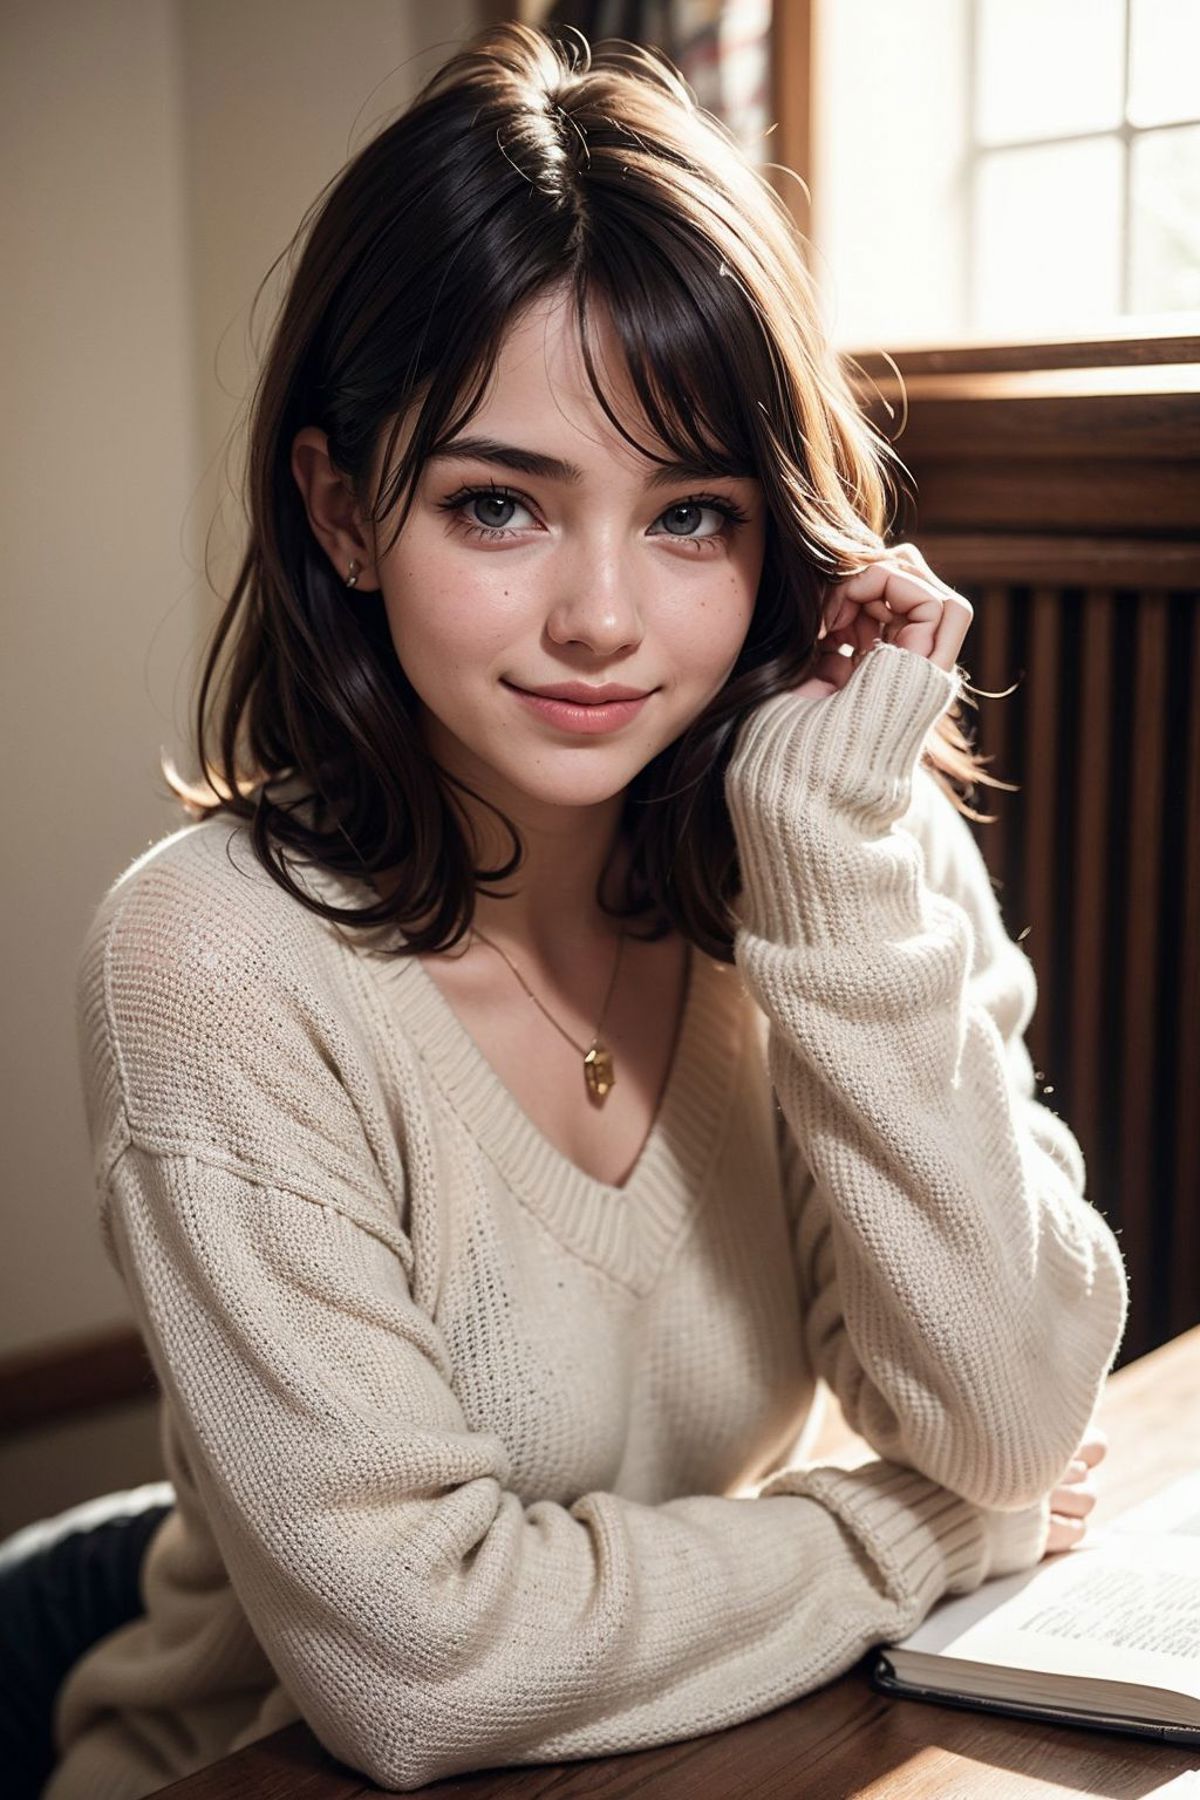 A girl with brown hair wearing a white sweater posing for a picture.